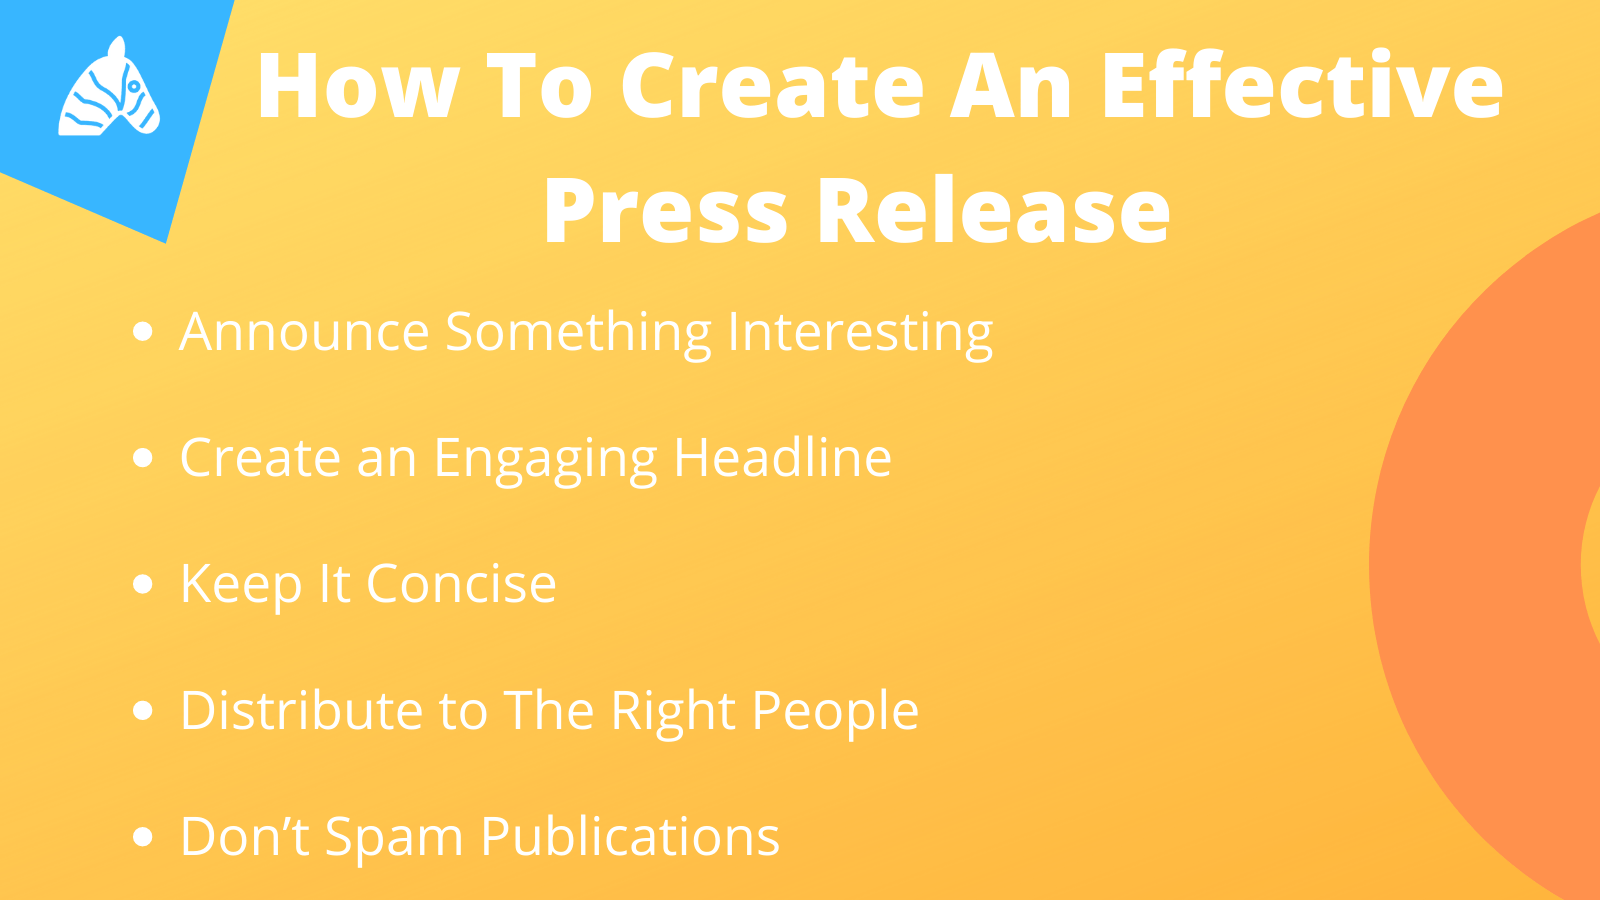 How to create an effective press release for SEO